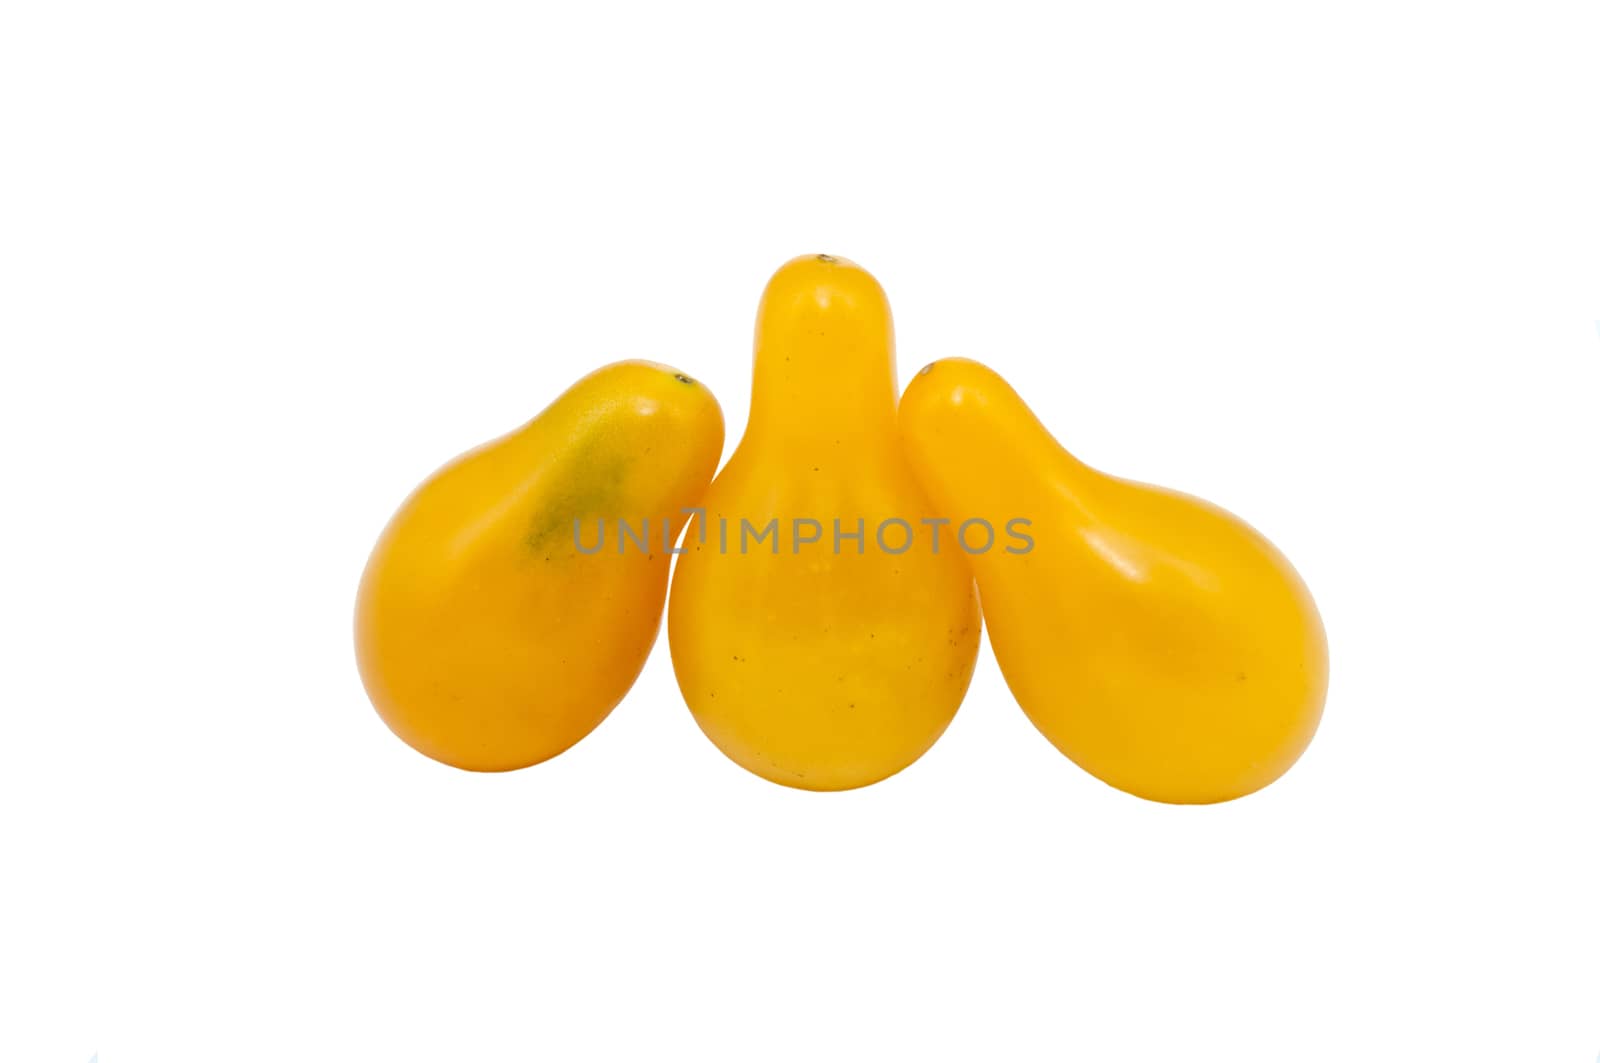 three yellow tomatoes isolated on white background